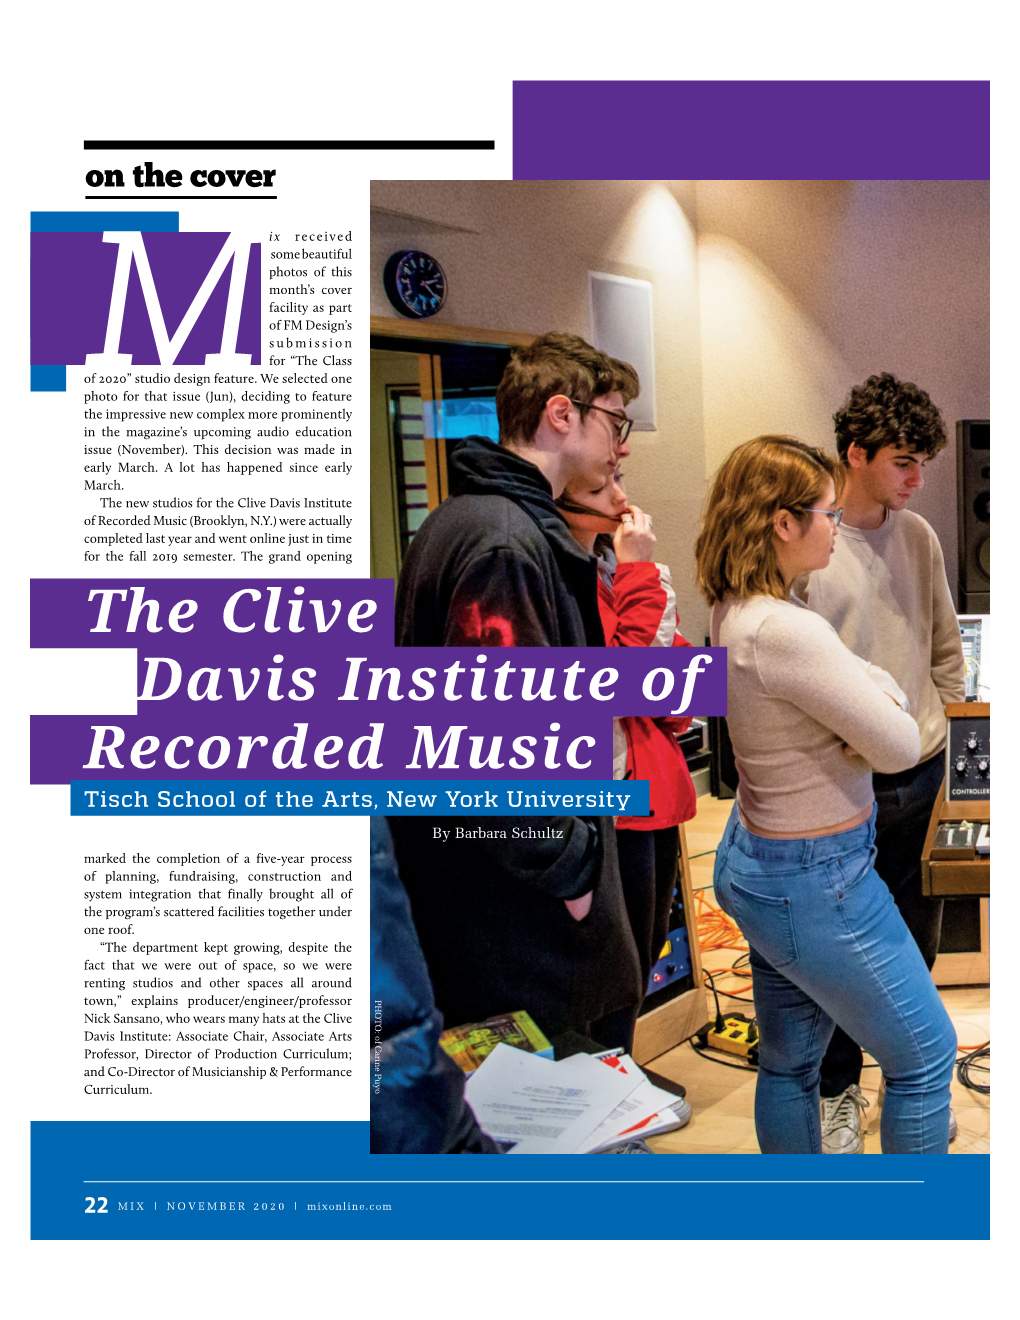 The Clive Davis Institute of Recorded Music (Brooklyn, N.Y.) Were Actually Completed Last Year and Went Online Just in Time for the Fall 2019 Semester